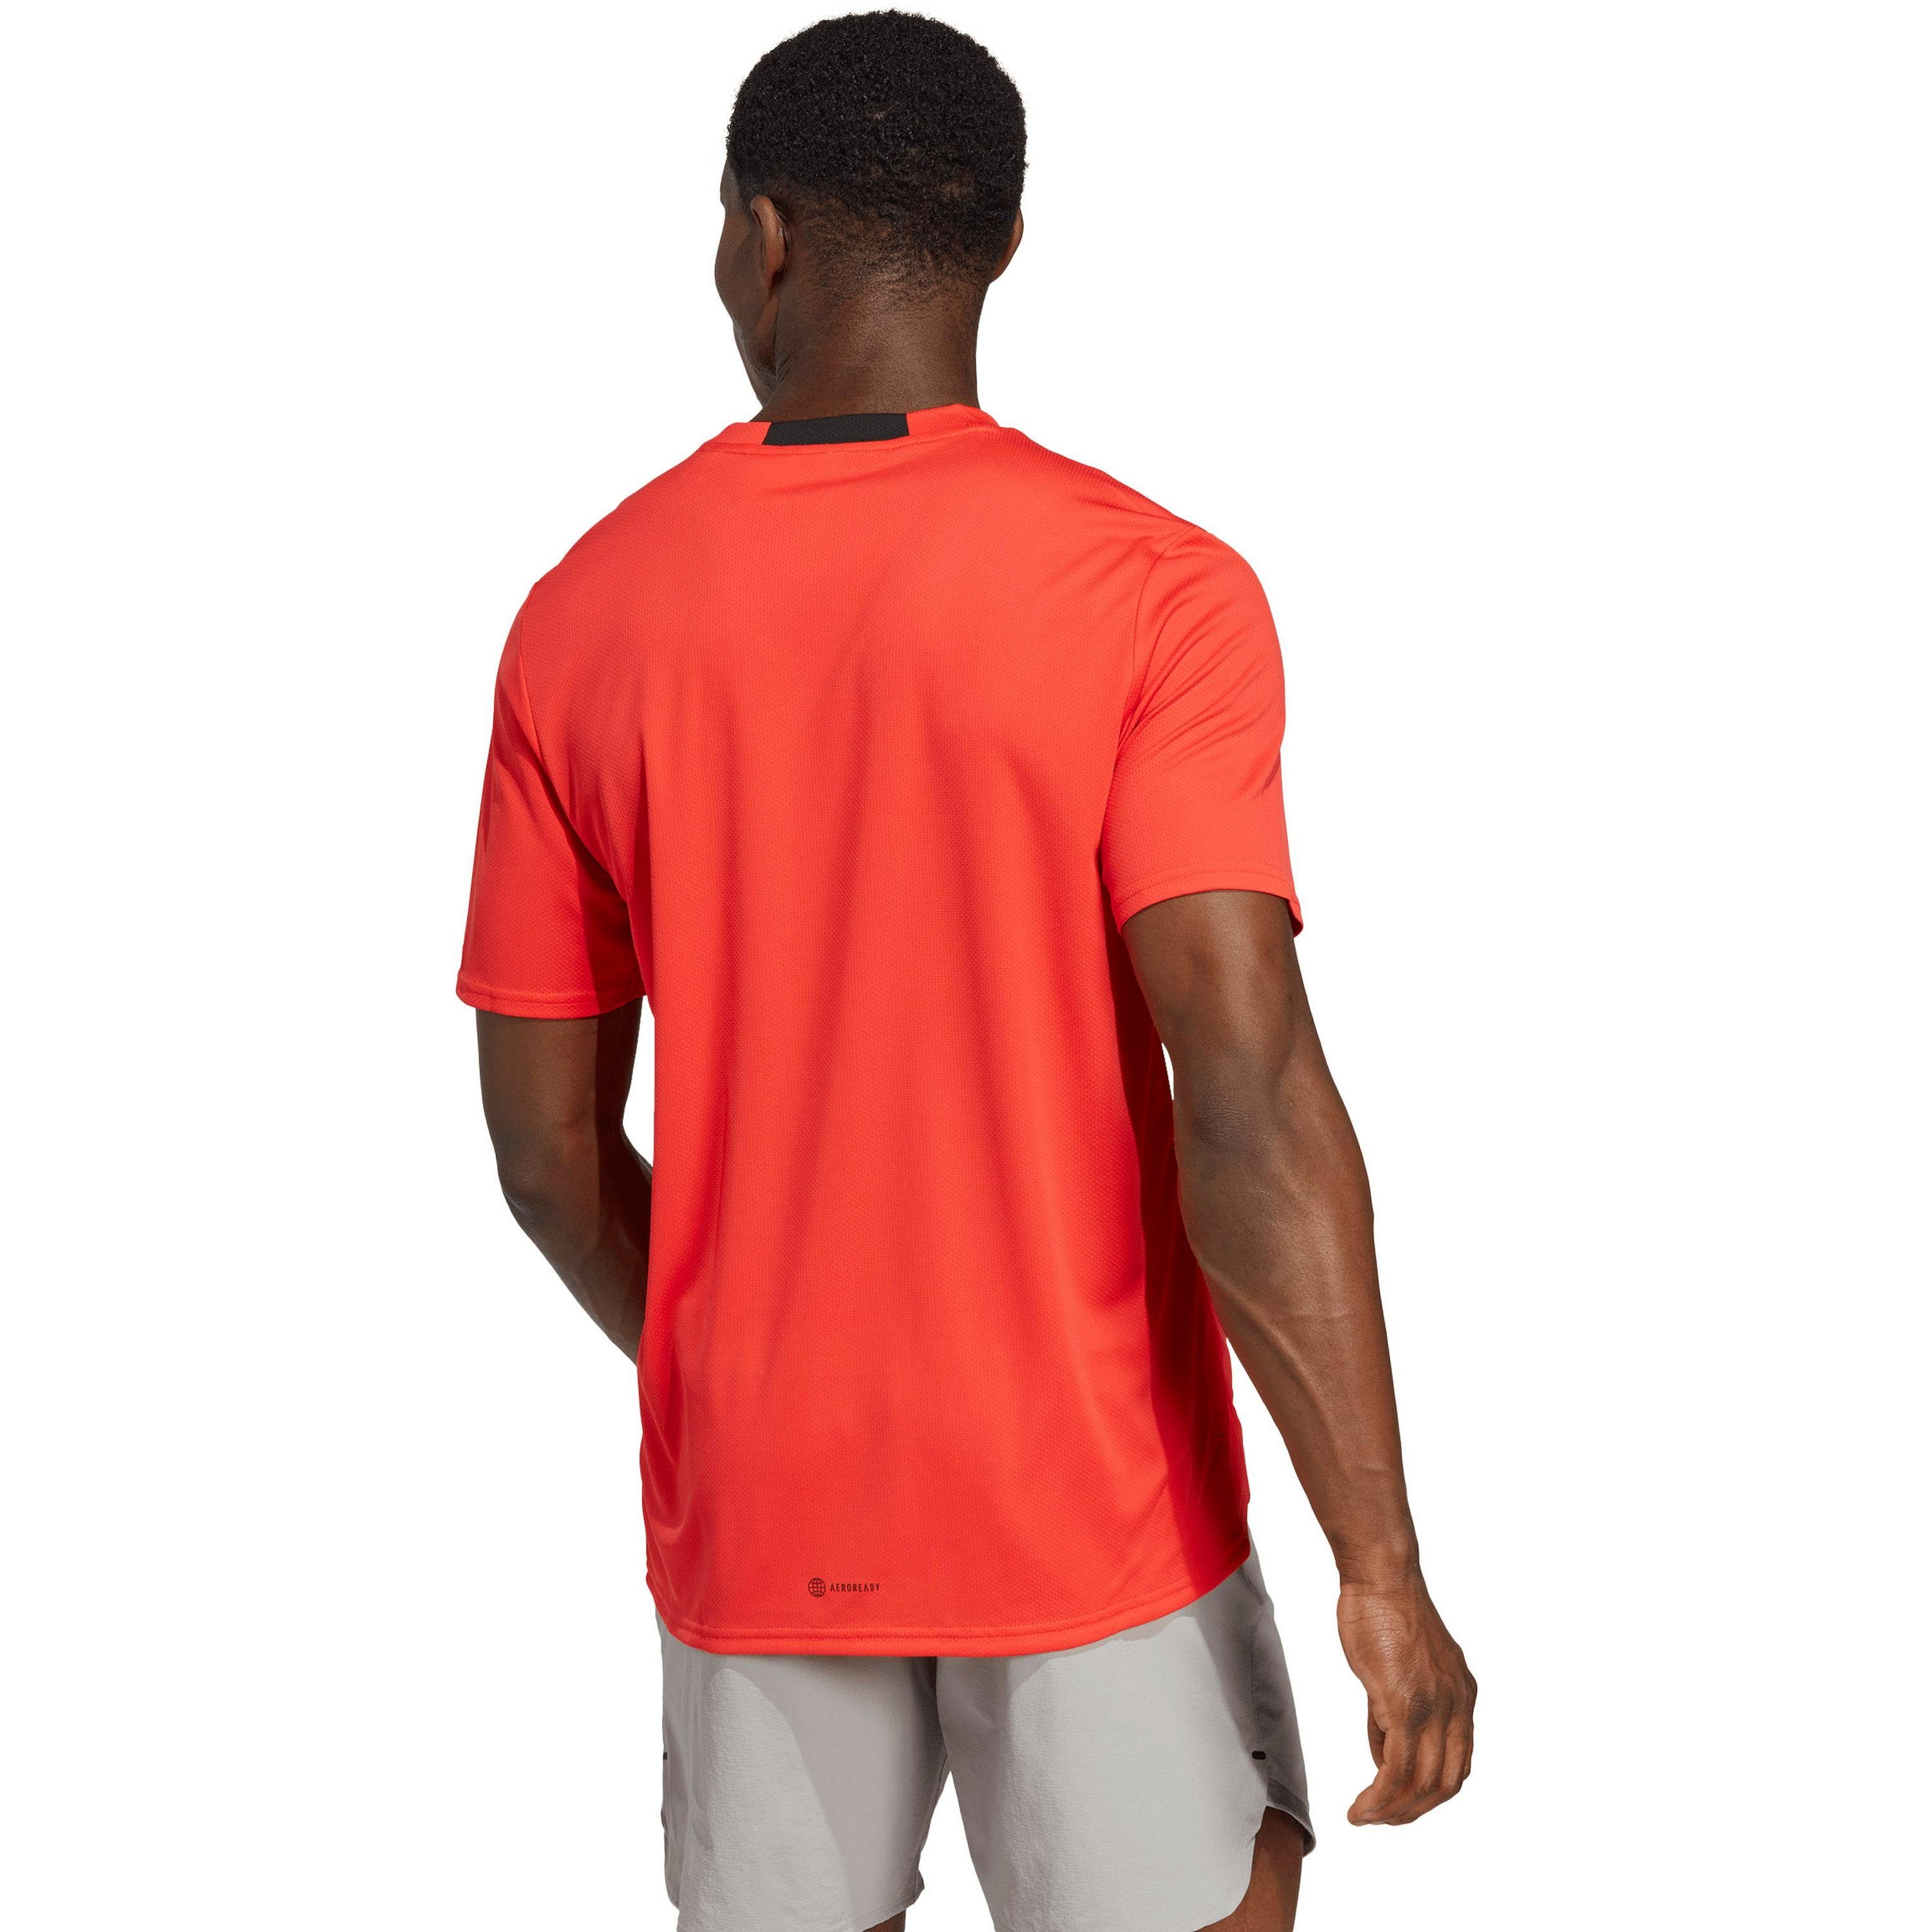 adidas Performance Funktionsshirt AEROREADY bright MOVEMENT FOR DESIGNED red-black